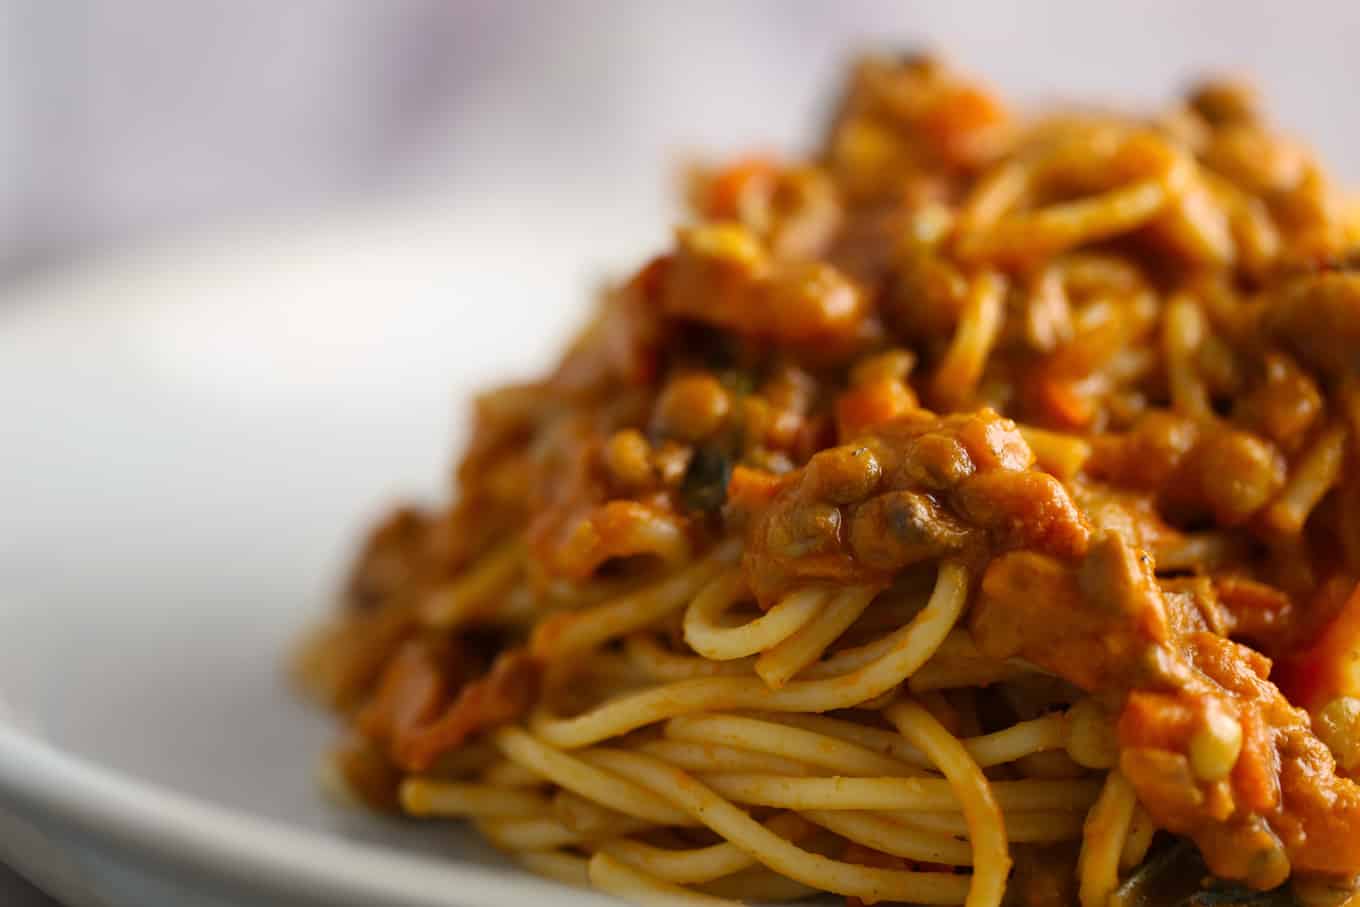 Plate with spaghetti and lentil bolognese sauce